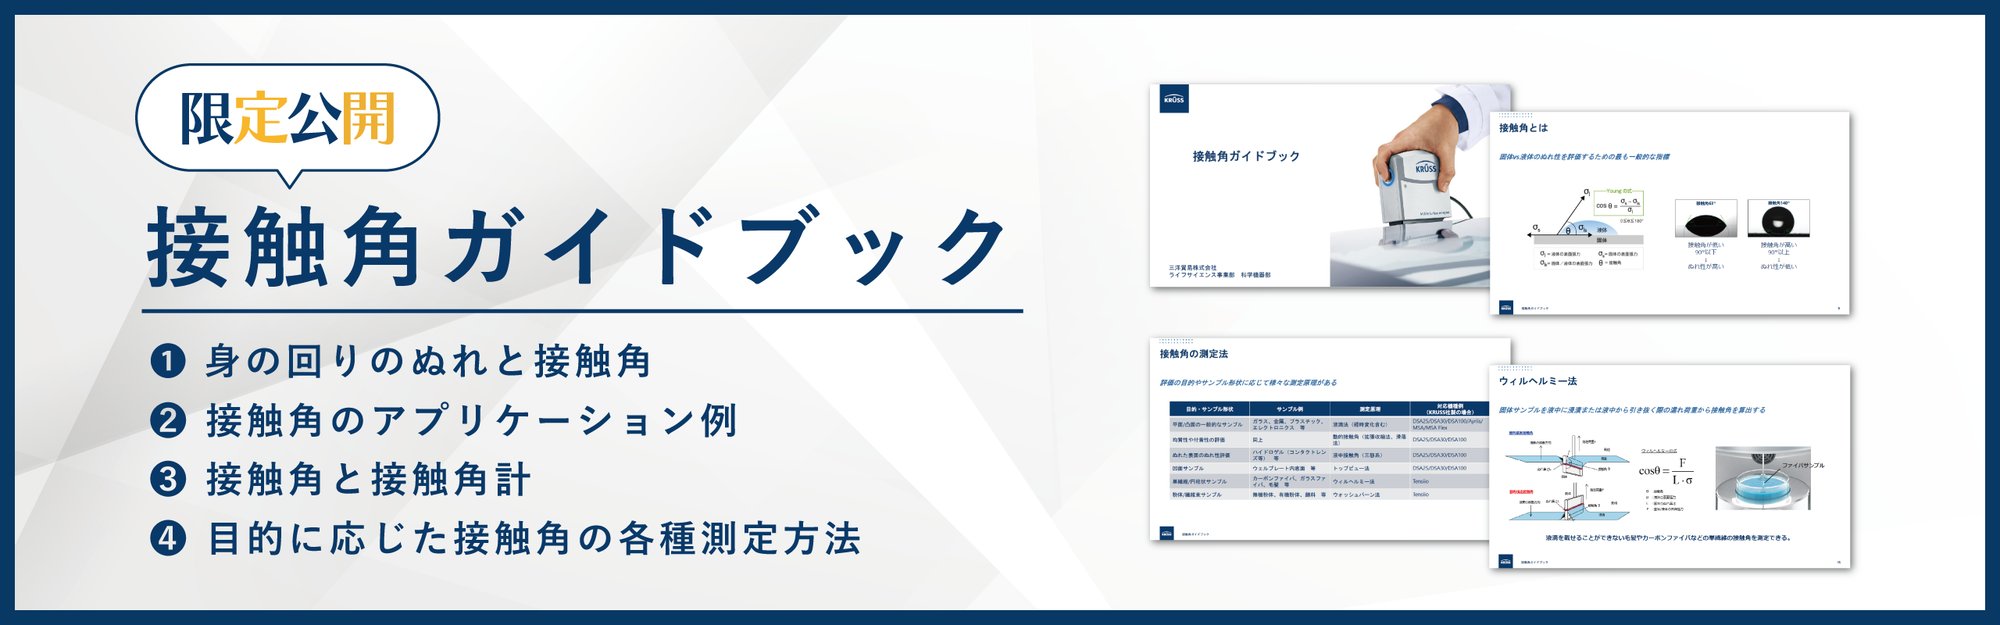 20231019_contact-angle_guidebook_banner01